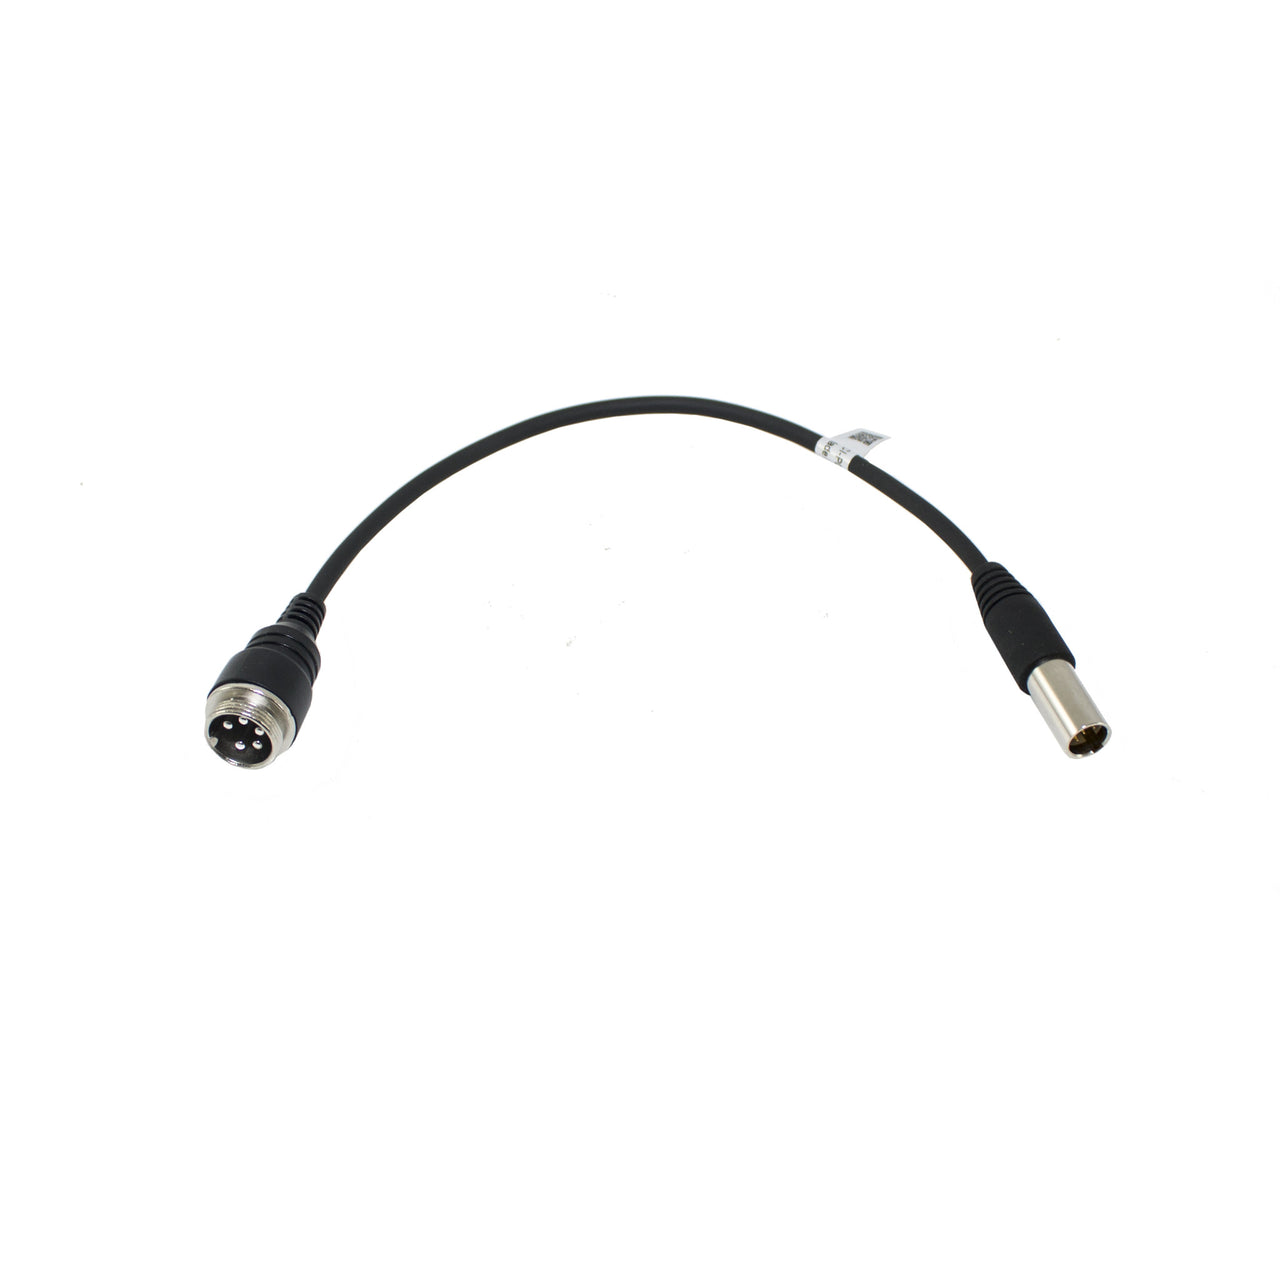 5-pin Male to TA5 Male Interface Cable